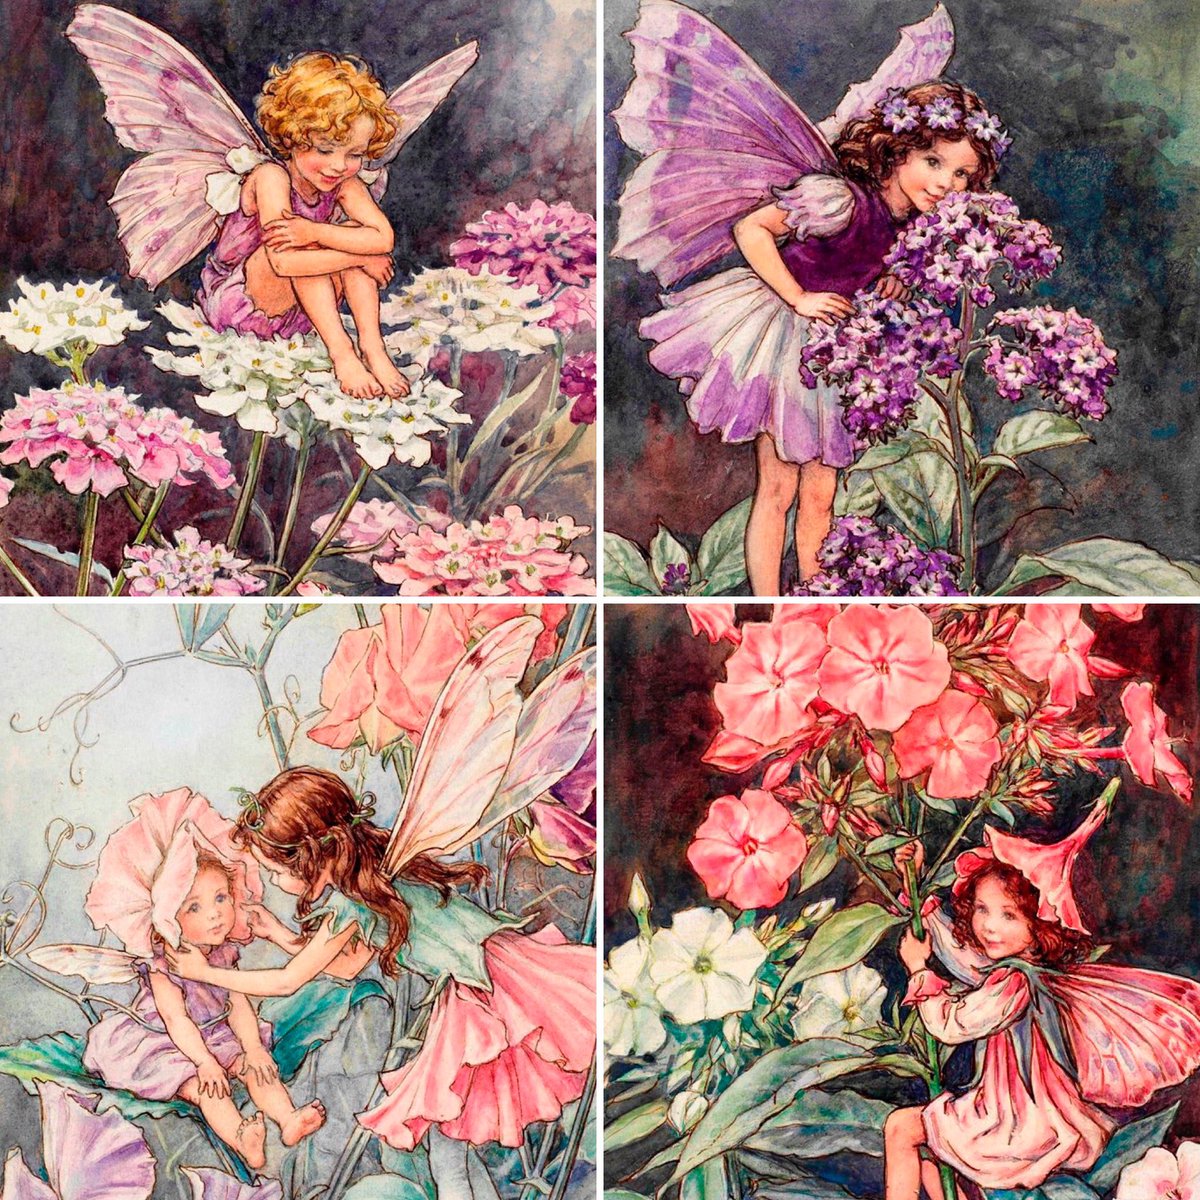 Some flower fairies of the garden for the #FlowerMoon. Here are: Candy Tuft, Heliotrope, Sweet Pea & Flox. #FolkyFriday #fullmoon #FolkloreSunday #Art: Cicely Mary Barker